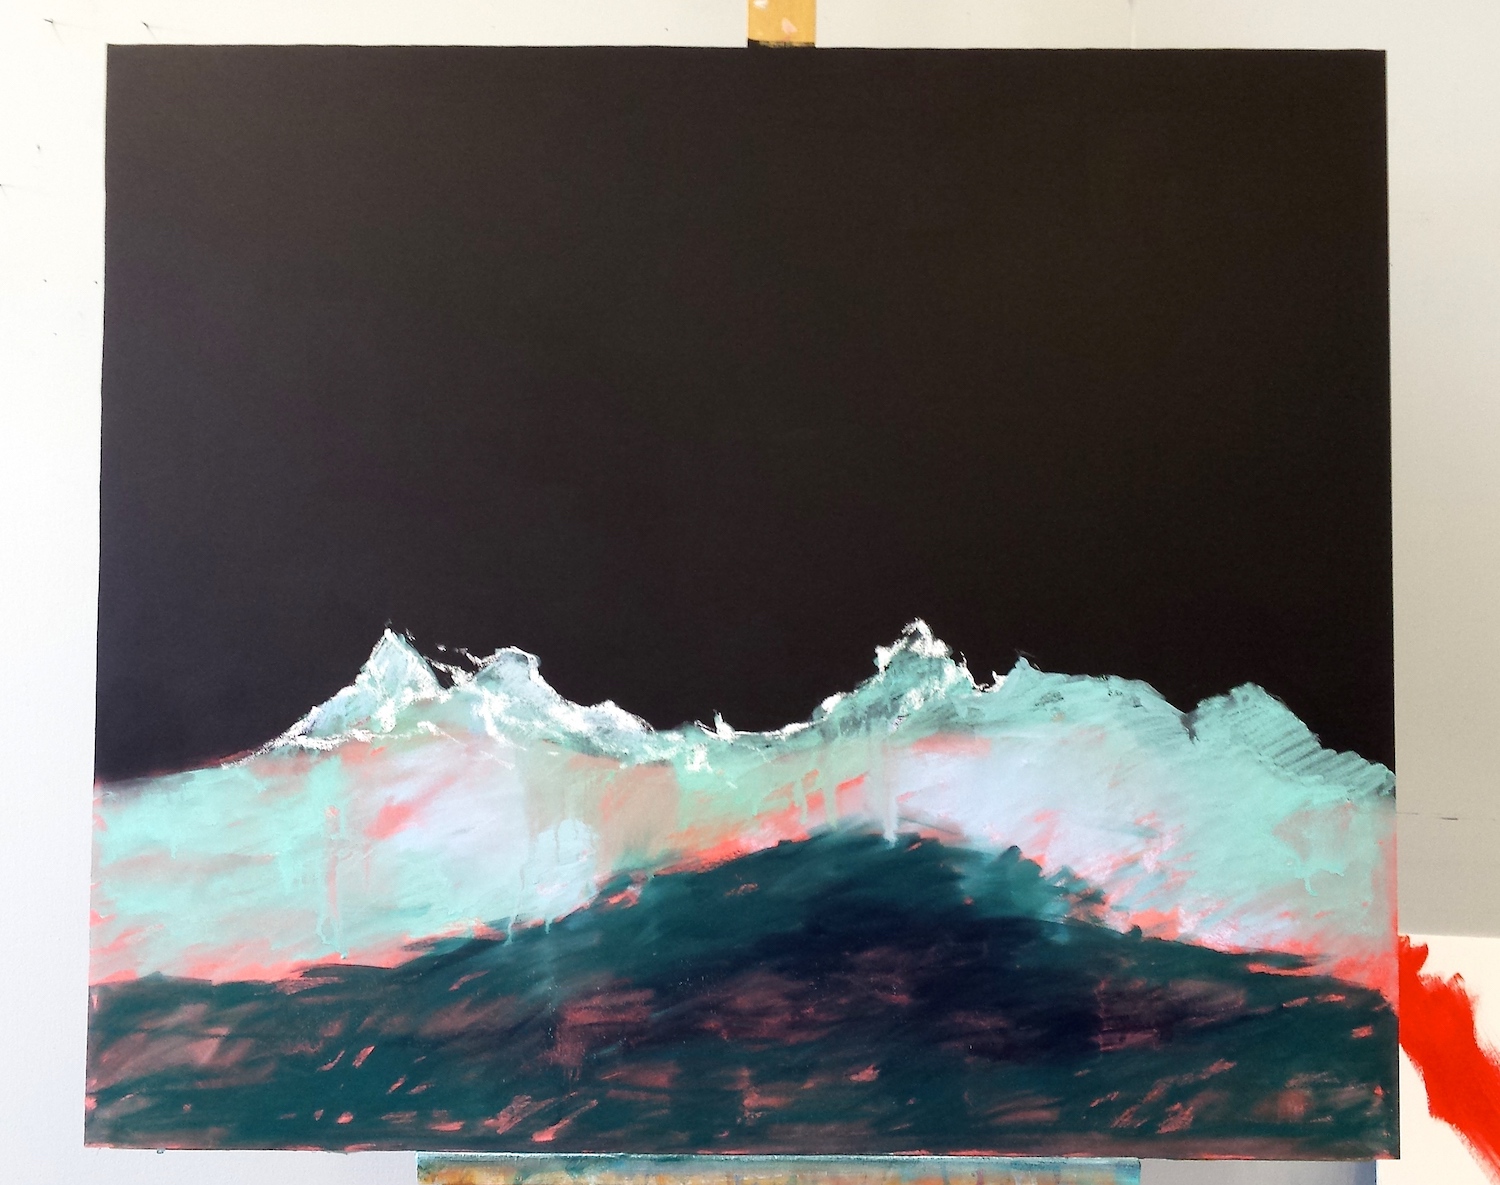 Jessica Masters, Wave demo1, 2018, pastel on board, 36 x 42 in. This image shows how I loosely wash in my colours and begin to build the shapes in the water.